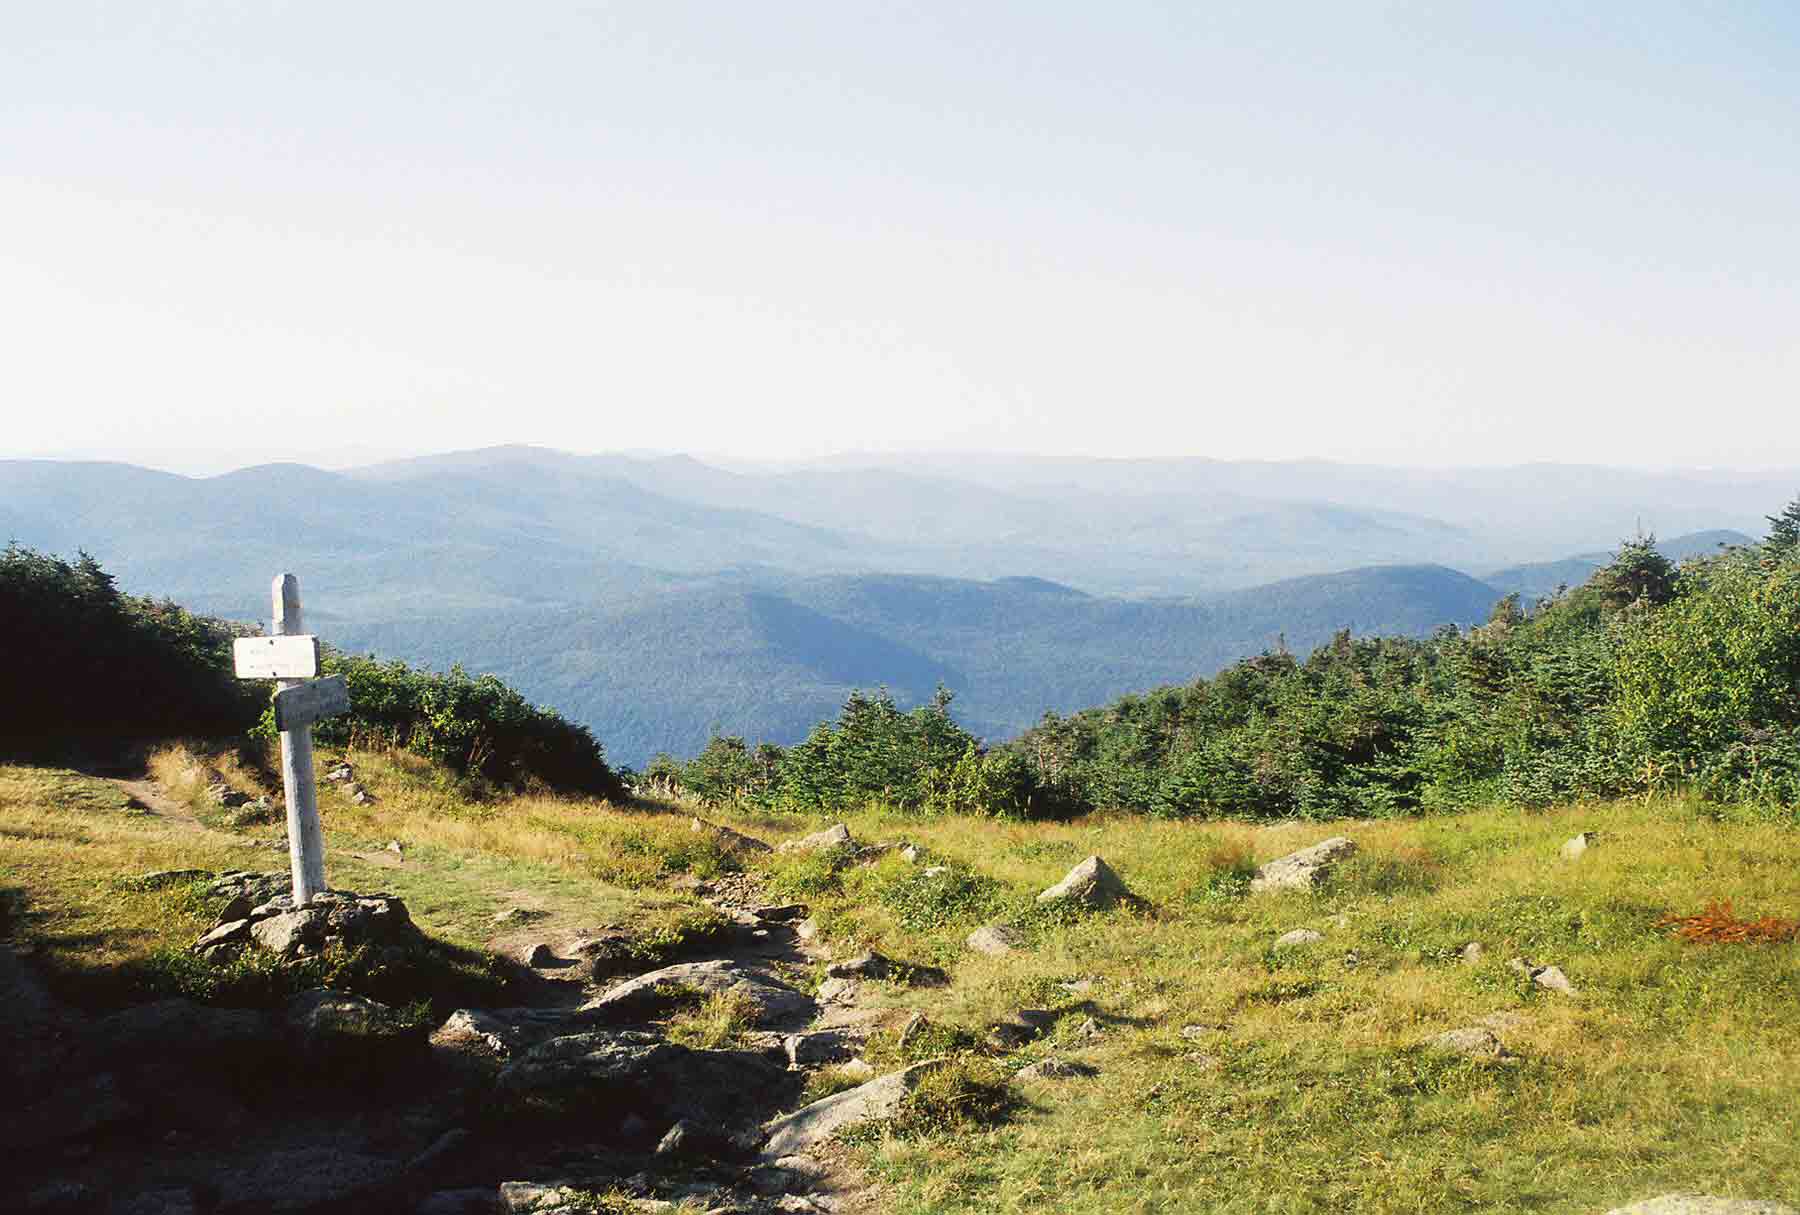 Looking north from the vicinity of the hut. The trail sign marks the junction of the Gulfside Trail (AT) and the Valley Way. The former heads west and south to traverse the Presidential Range. The latter descends north to US 2. Courtesy dlcul@conncoll.edu